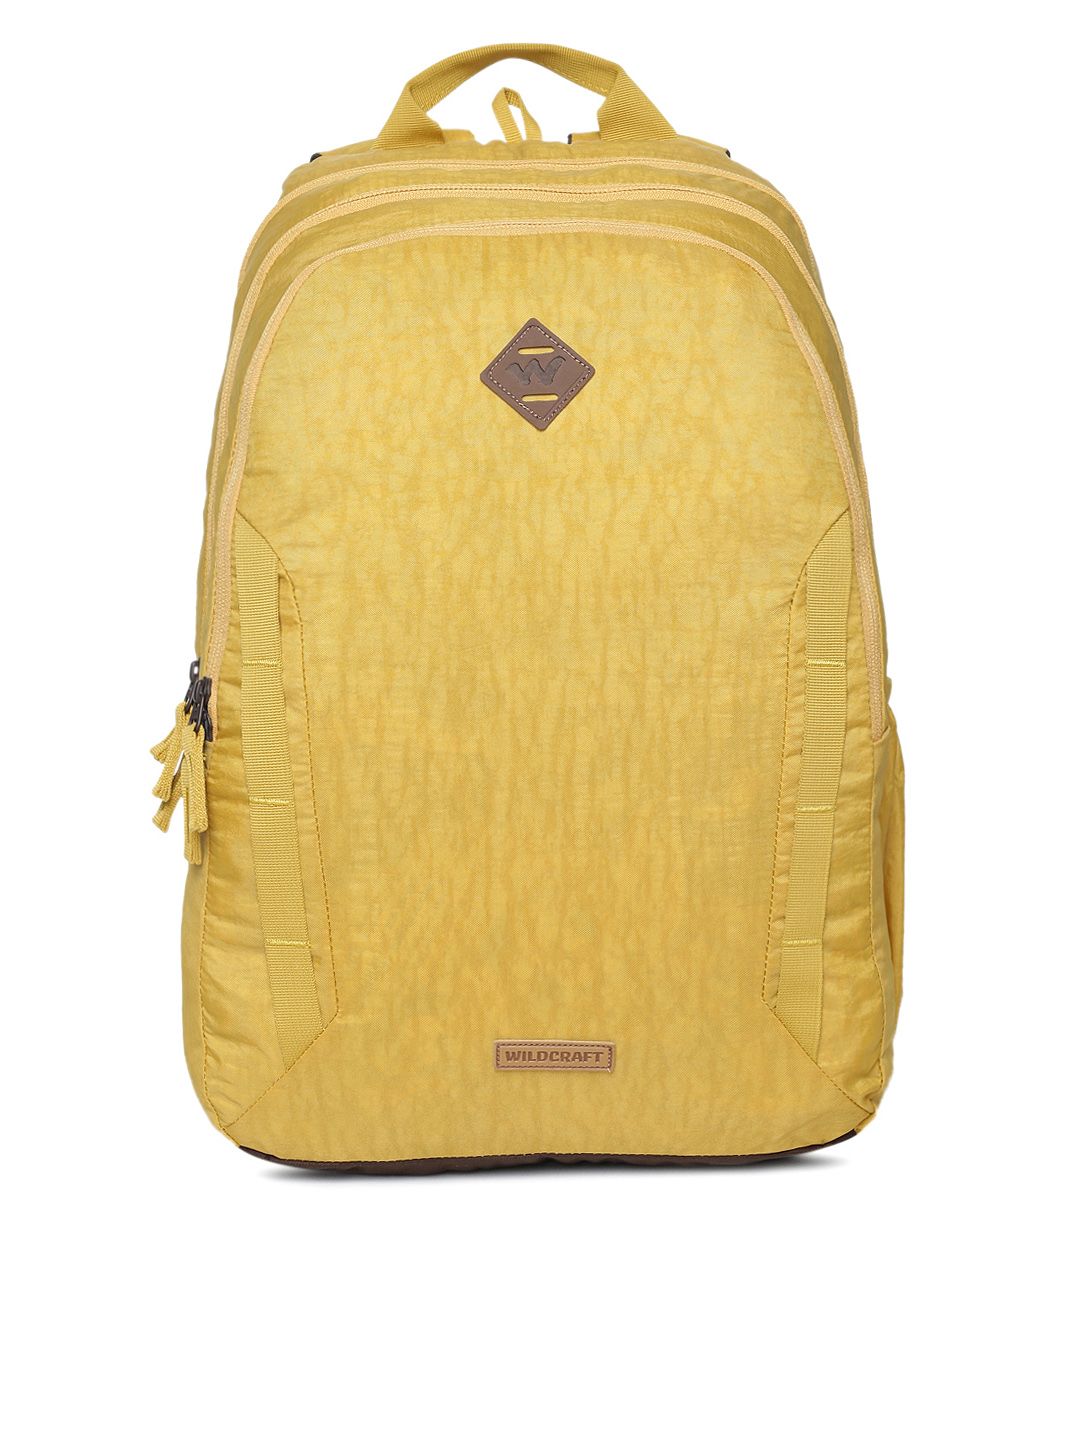 Wildcraft Unisex Yellow Solid Dash Laptop Backpack Price in India